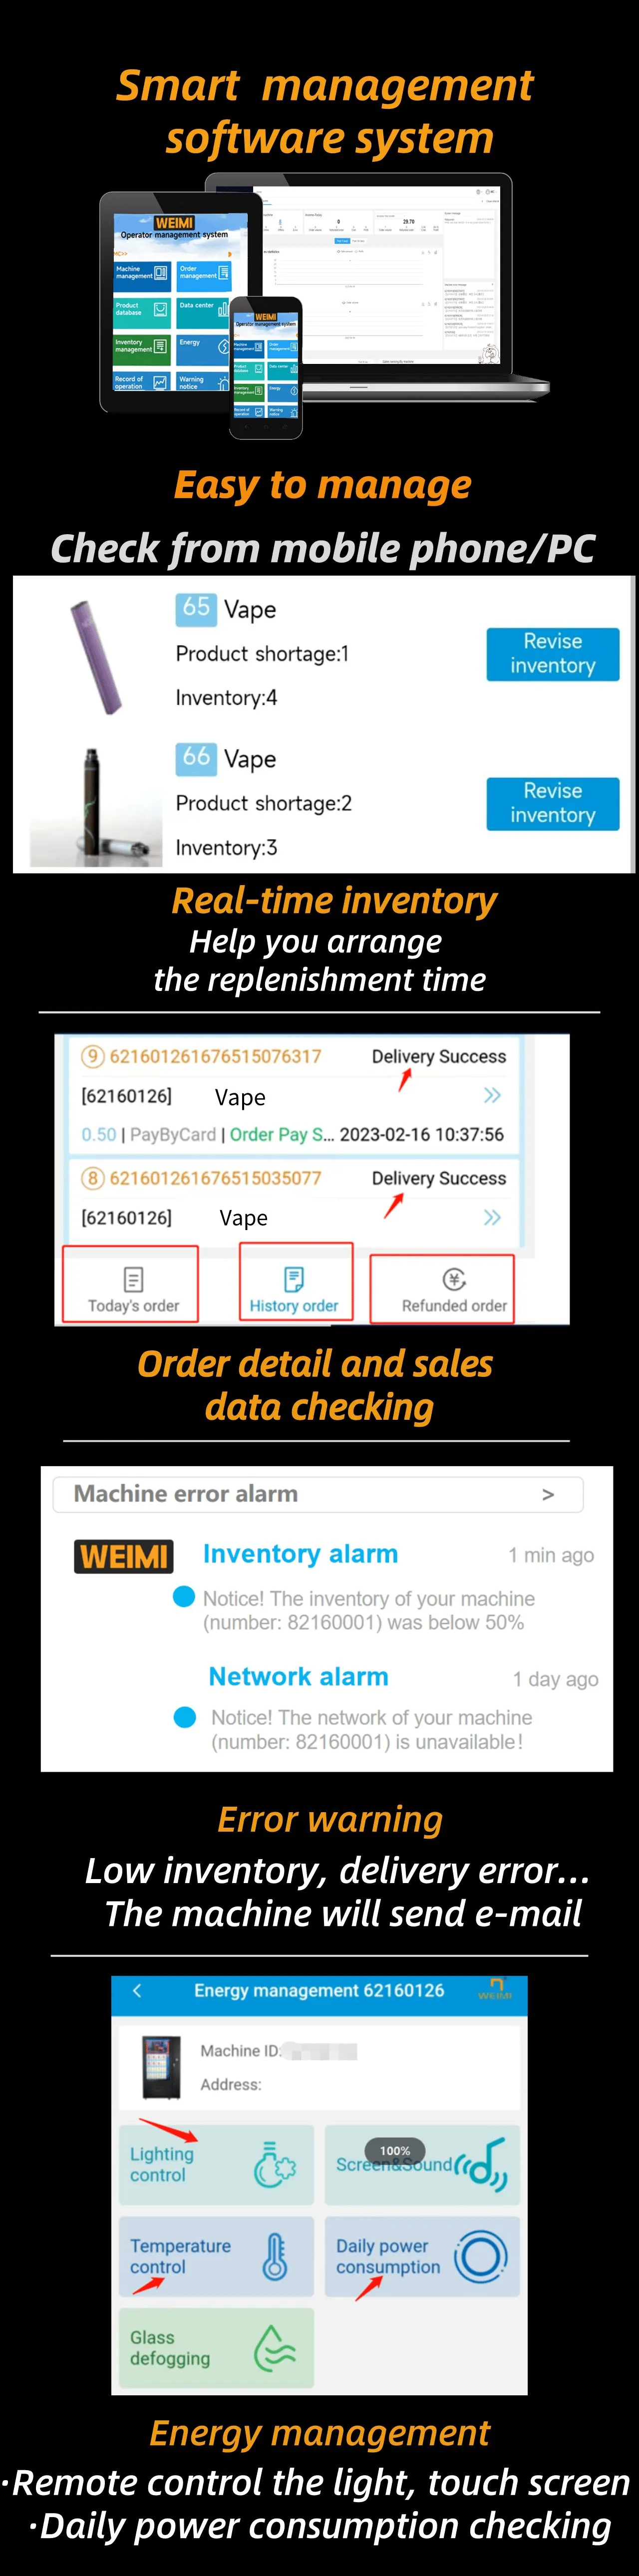 We offer smart software management system for vape vending machine, so operator can check sales and inventory on the mobile/PC